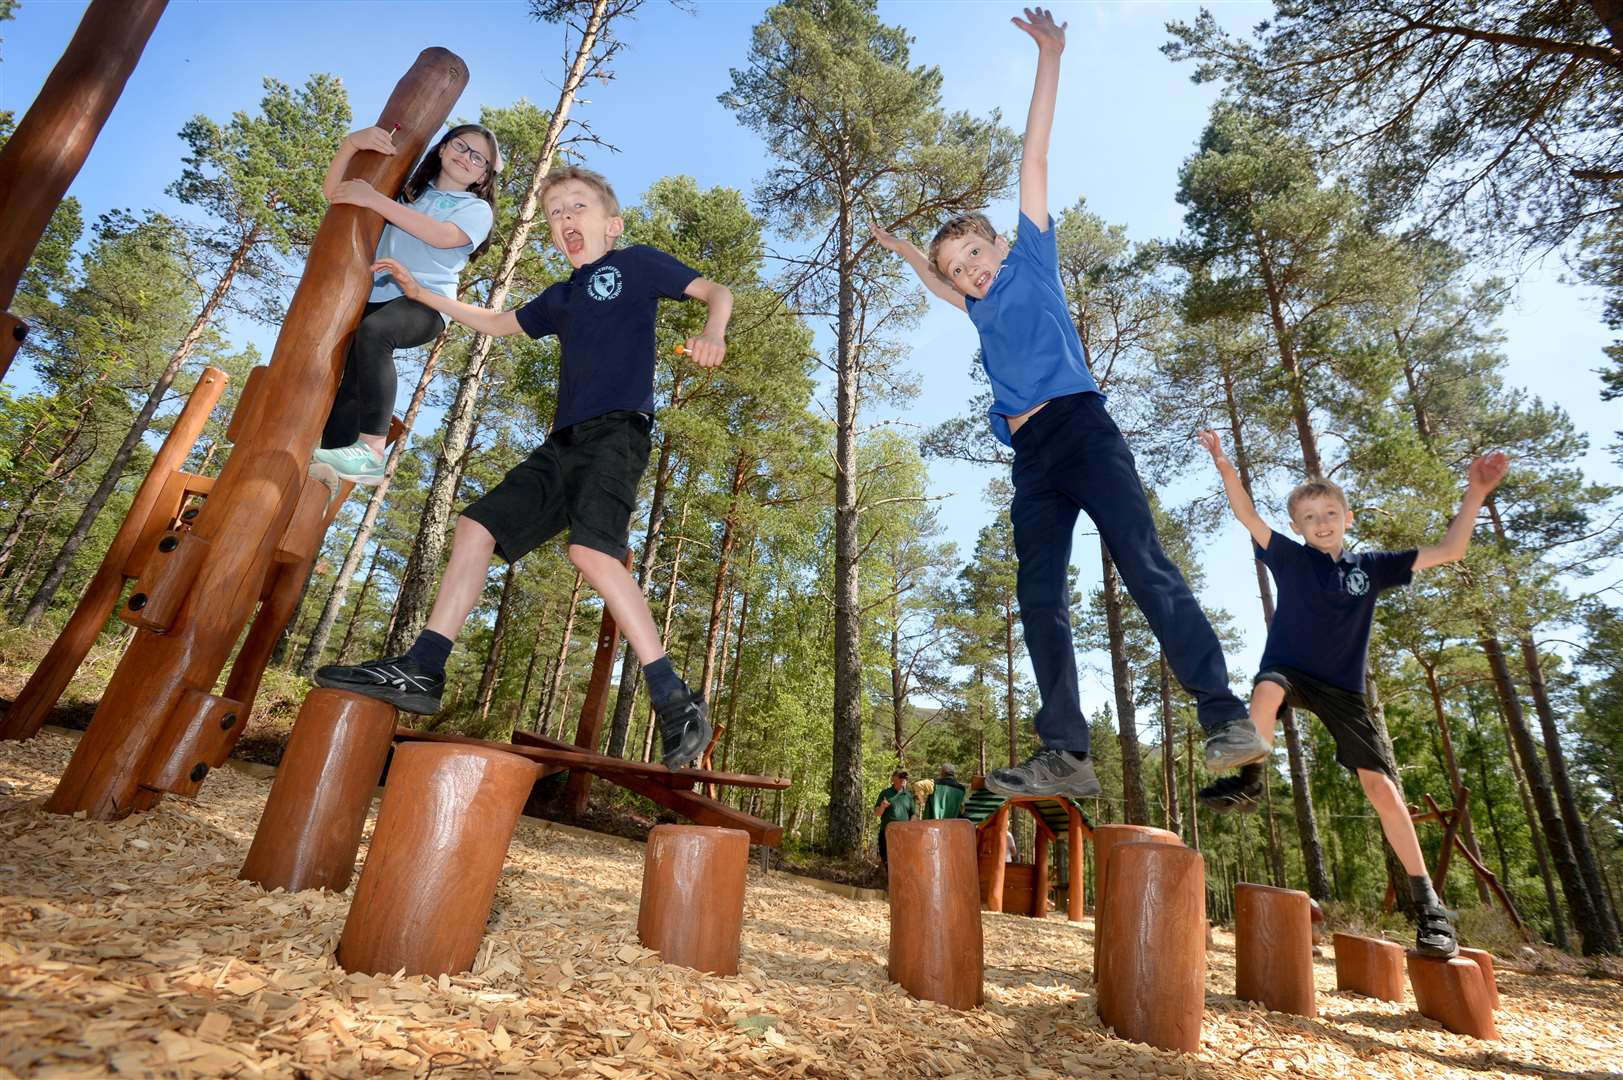 Wyvis Natural Play Park near Garve is a great place for kids to let off steam and get closer to nature in the forest. Picture: Gair Fraser/SPP